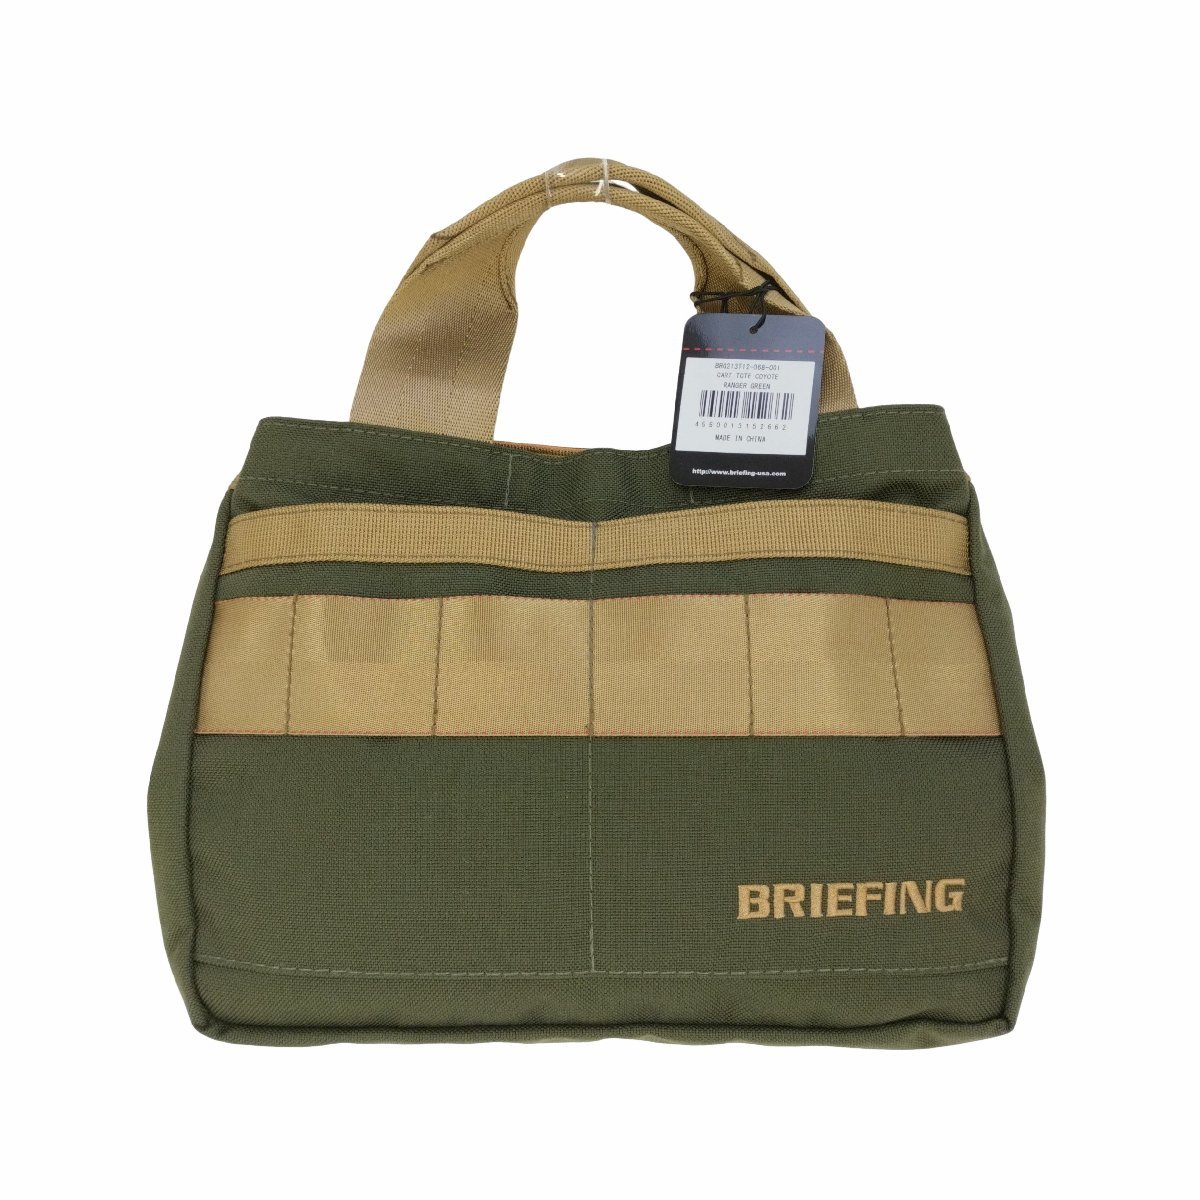 BRIEFING(ブリーフィング) CART TOTE COYOTE カート トート コヨーテ トートバッ 中古 古着 0645